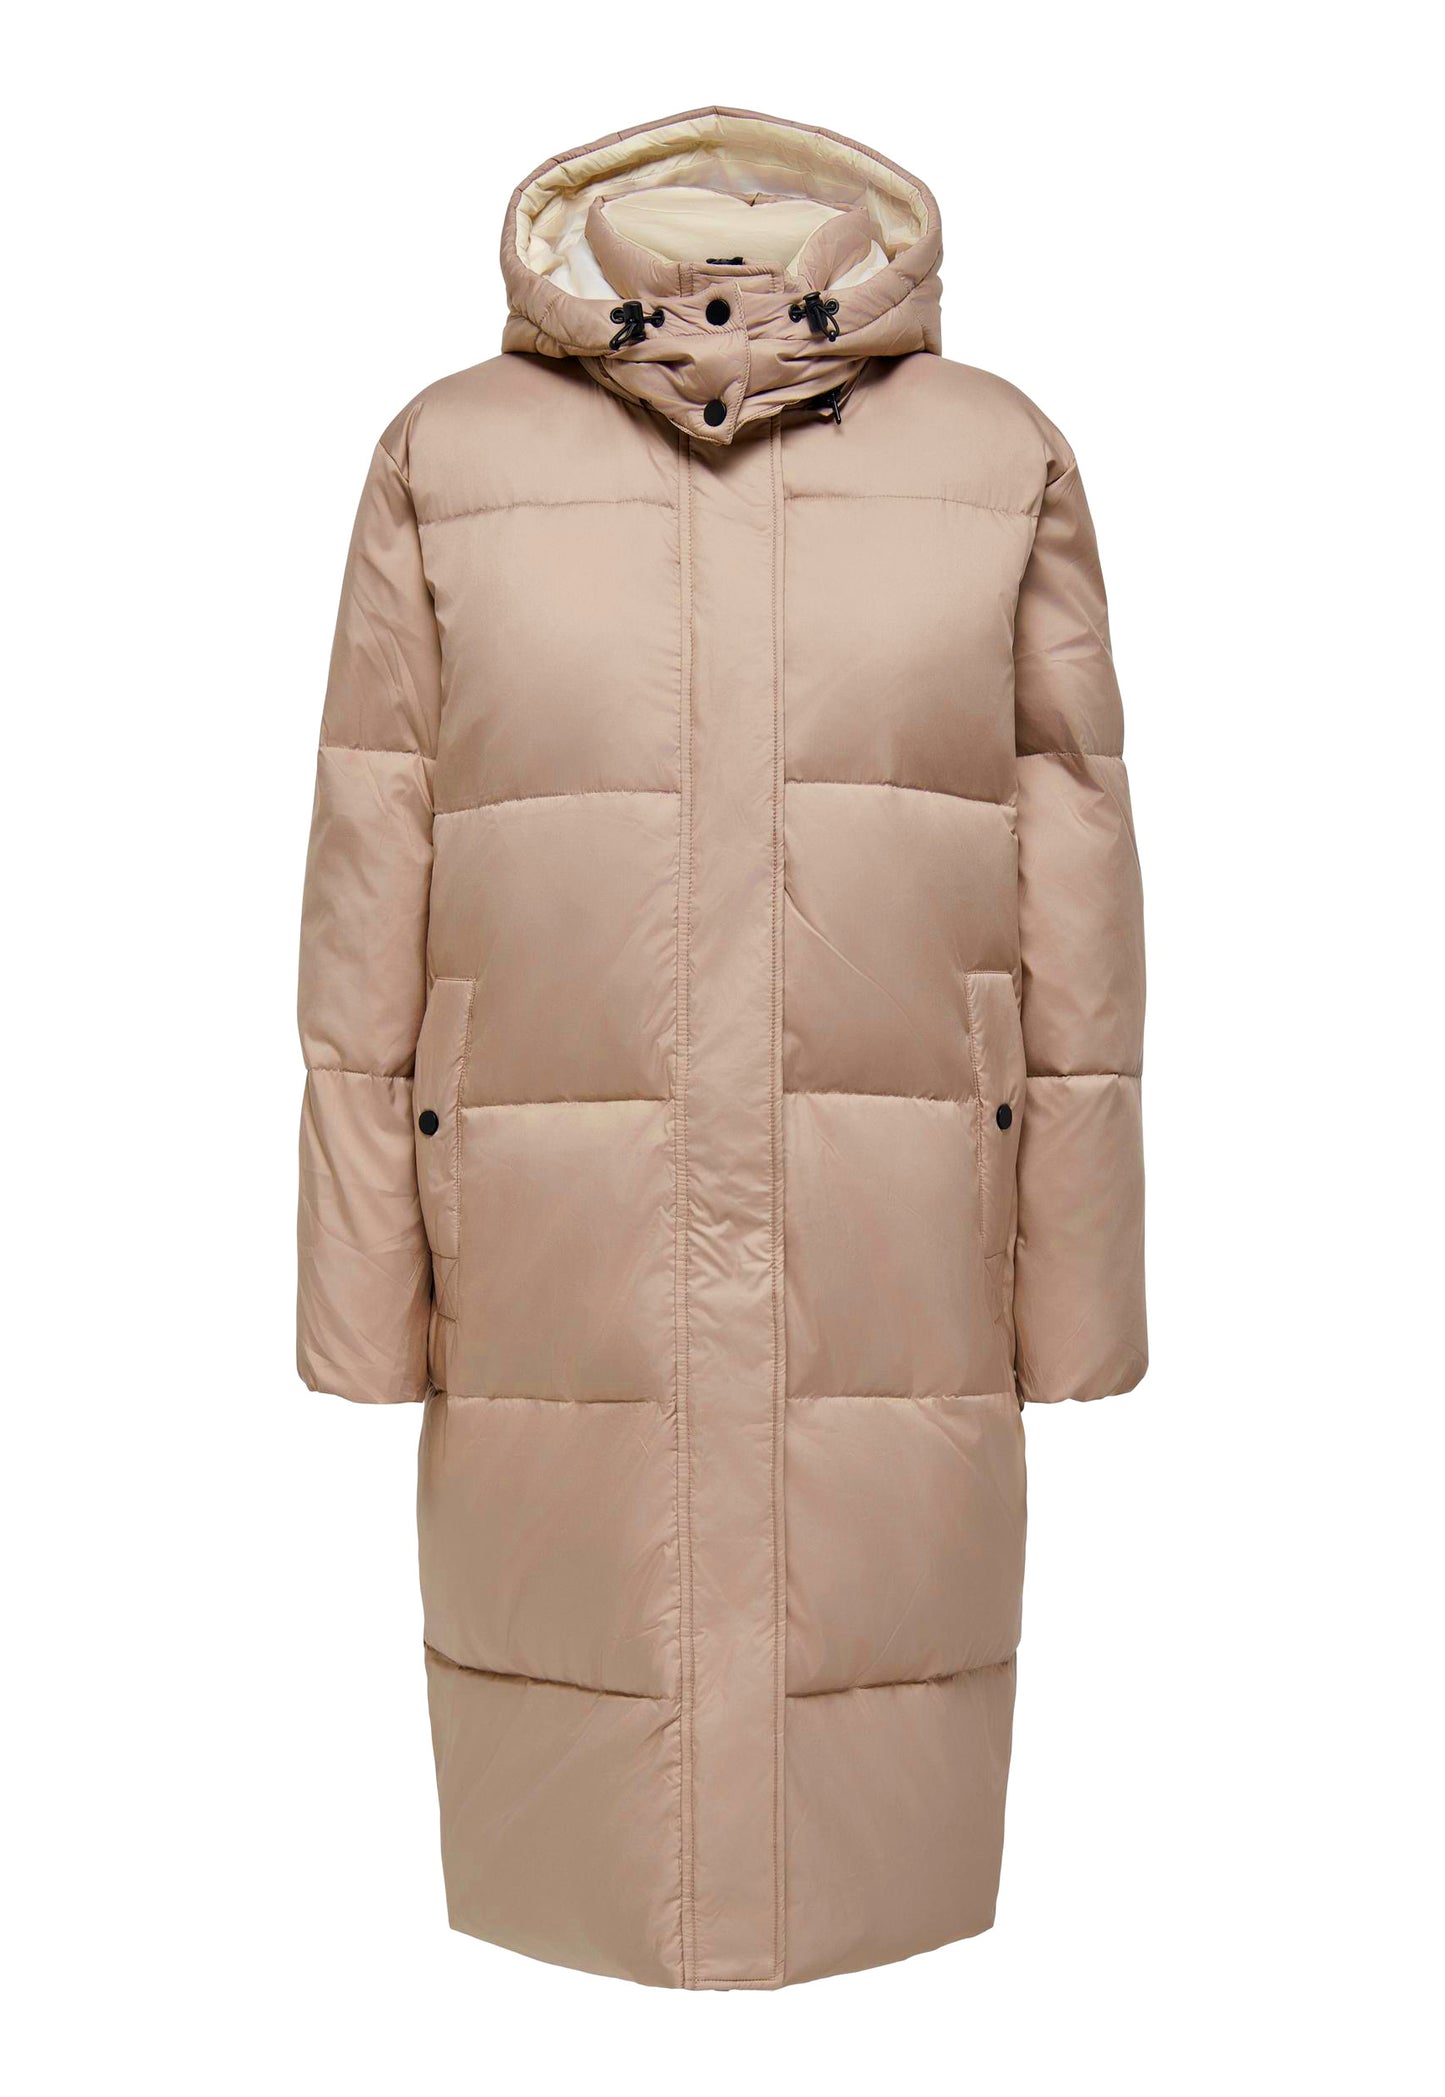 ONLY Premium Vilma Midi Down Puffer Coat with Hood in Beige - One Nation Clothing